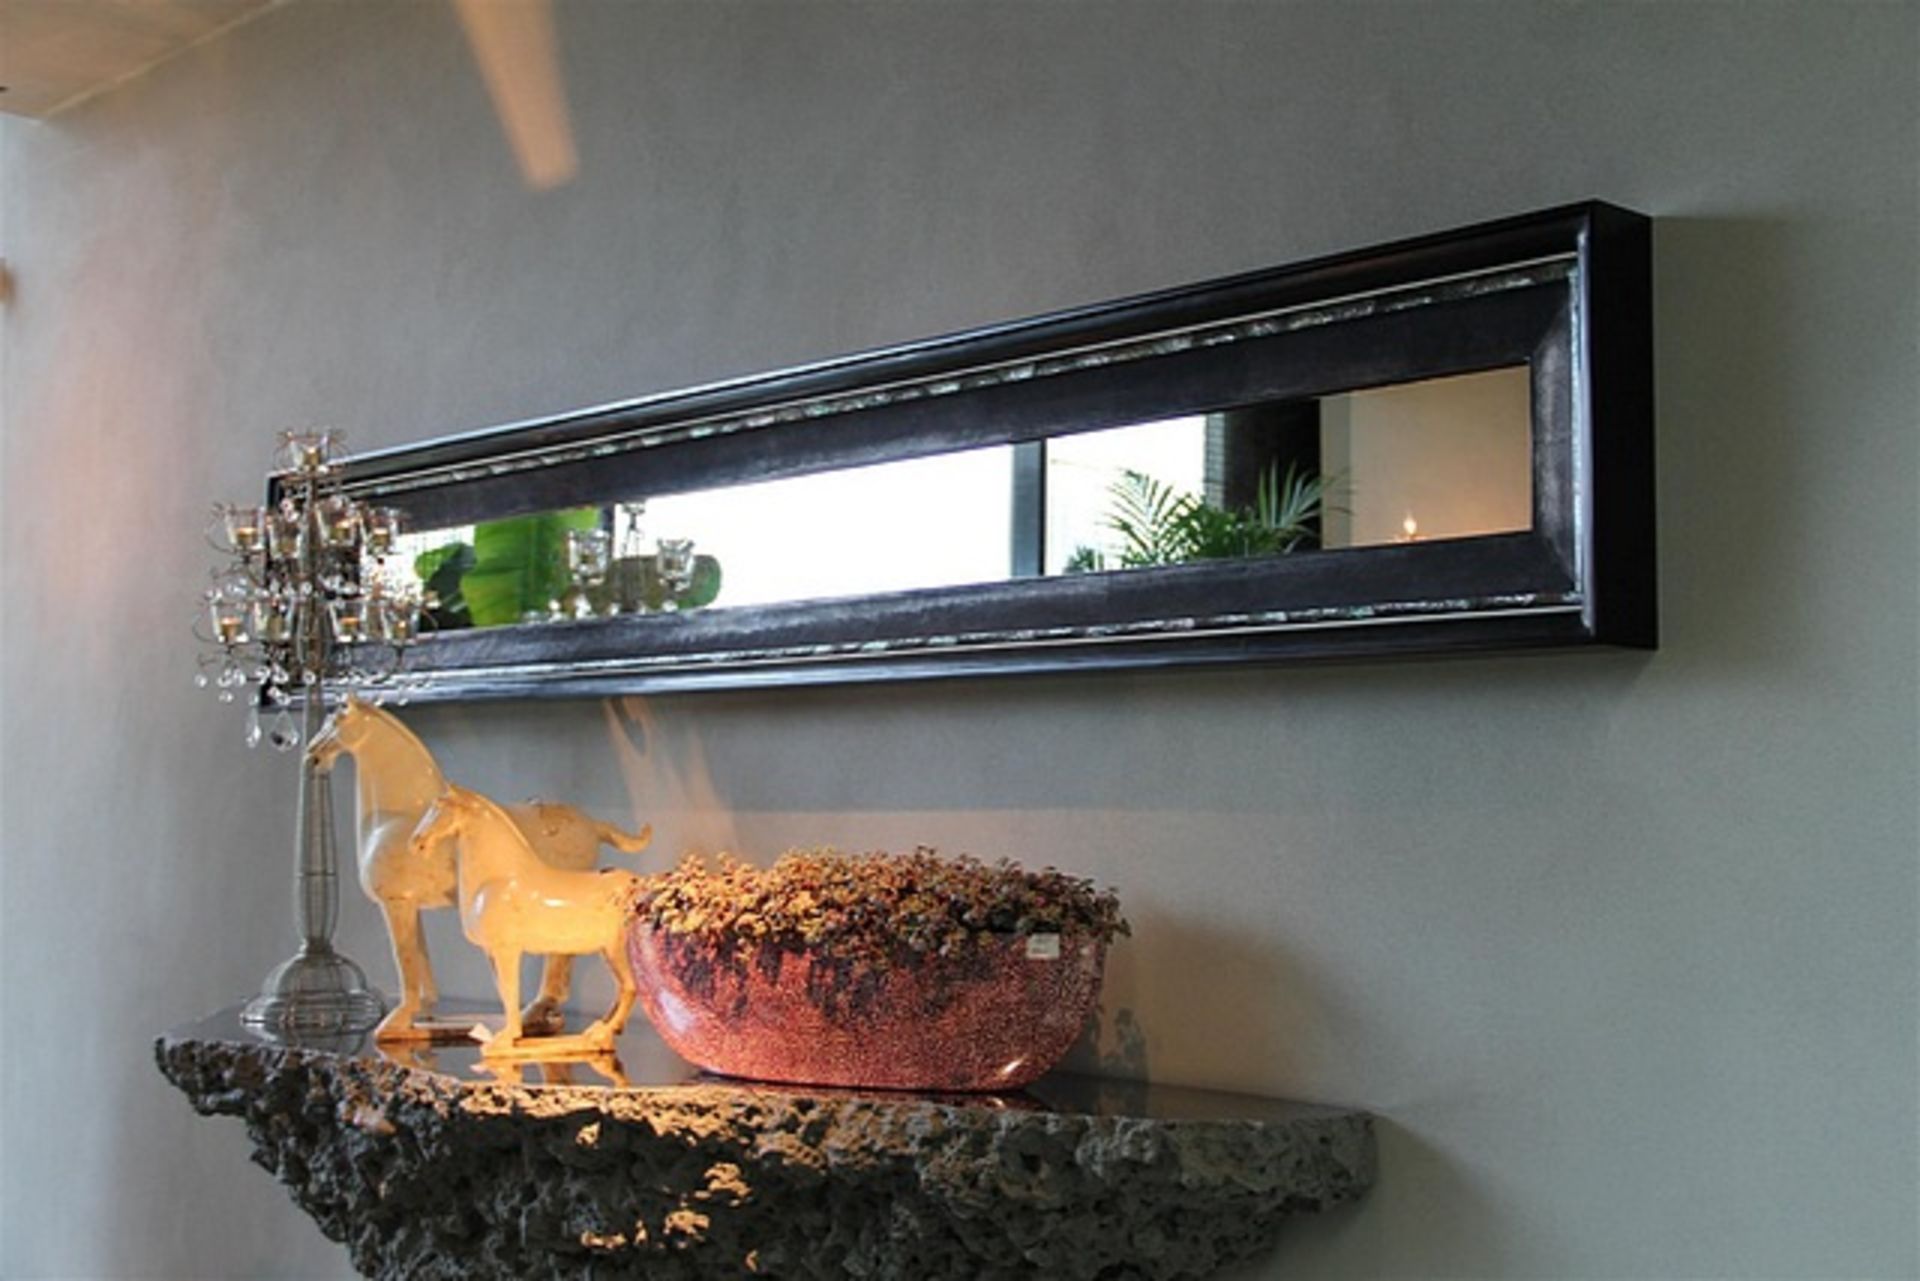 Vulgan Mirror channels an exotic attitude with a sleek clean lined profile giving it a distinctive